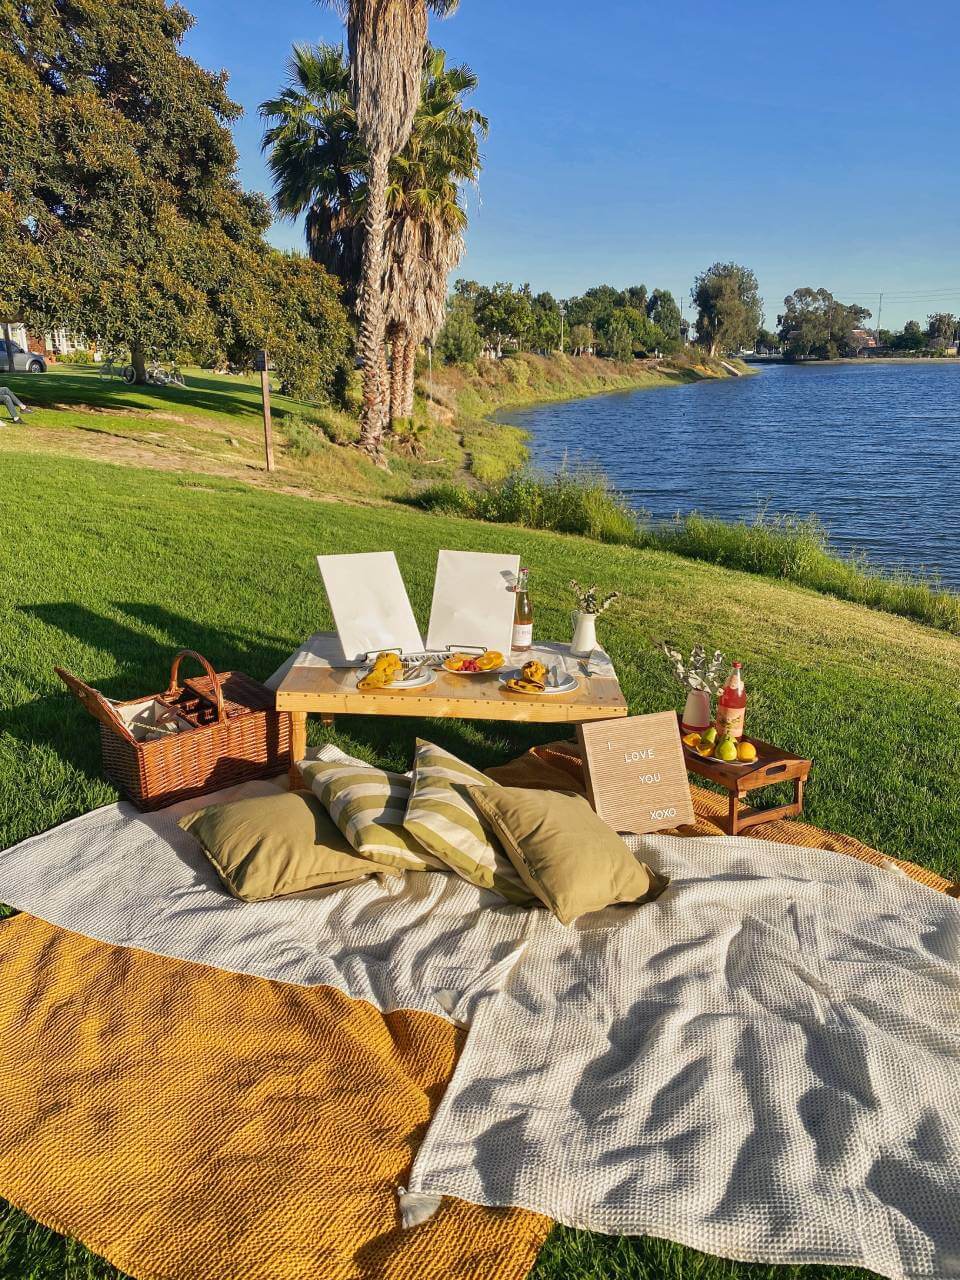 pop-up picnic services in Long Beach, CA